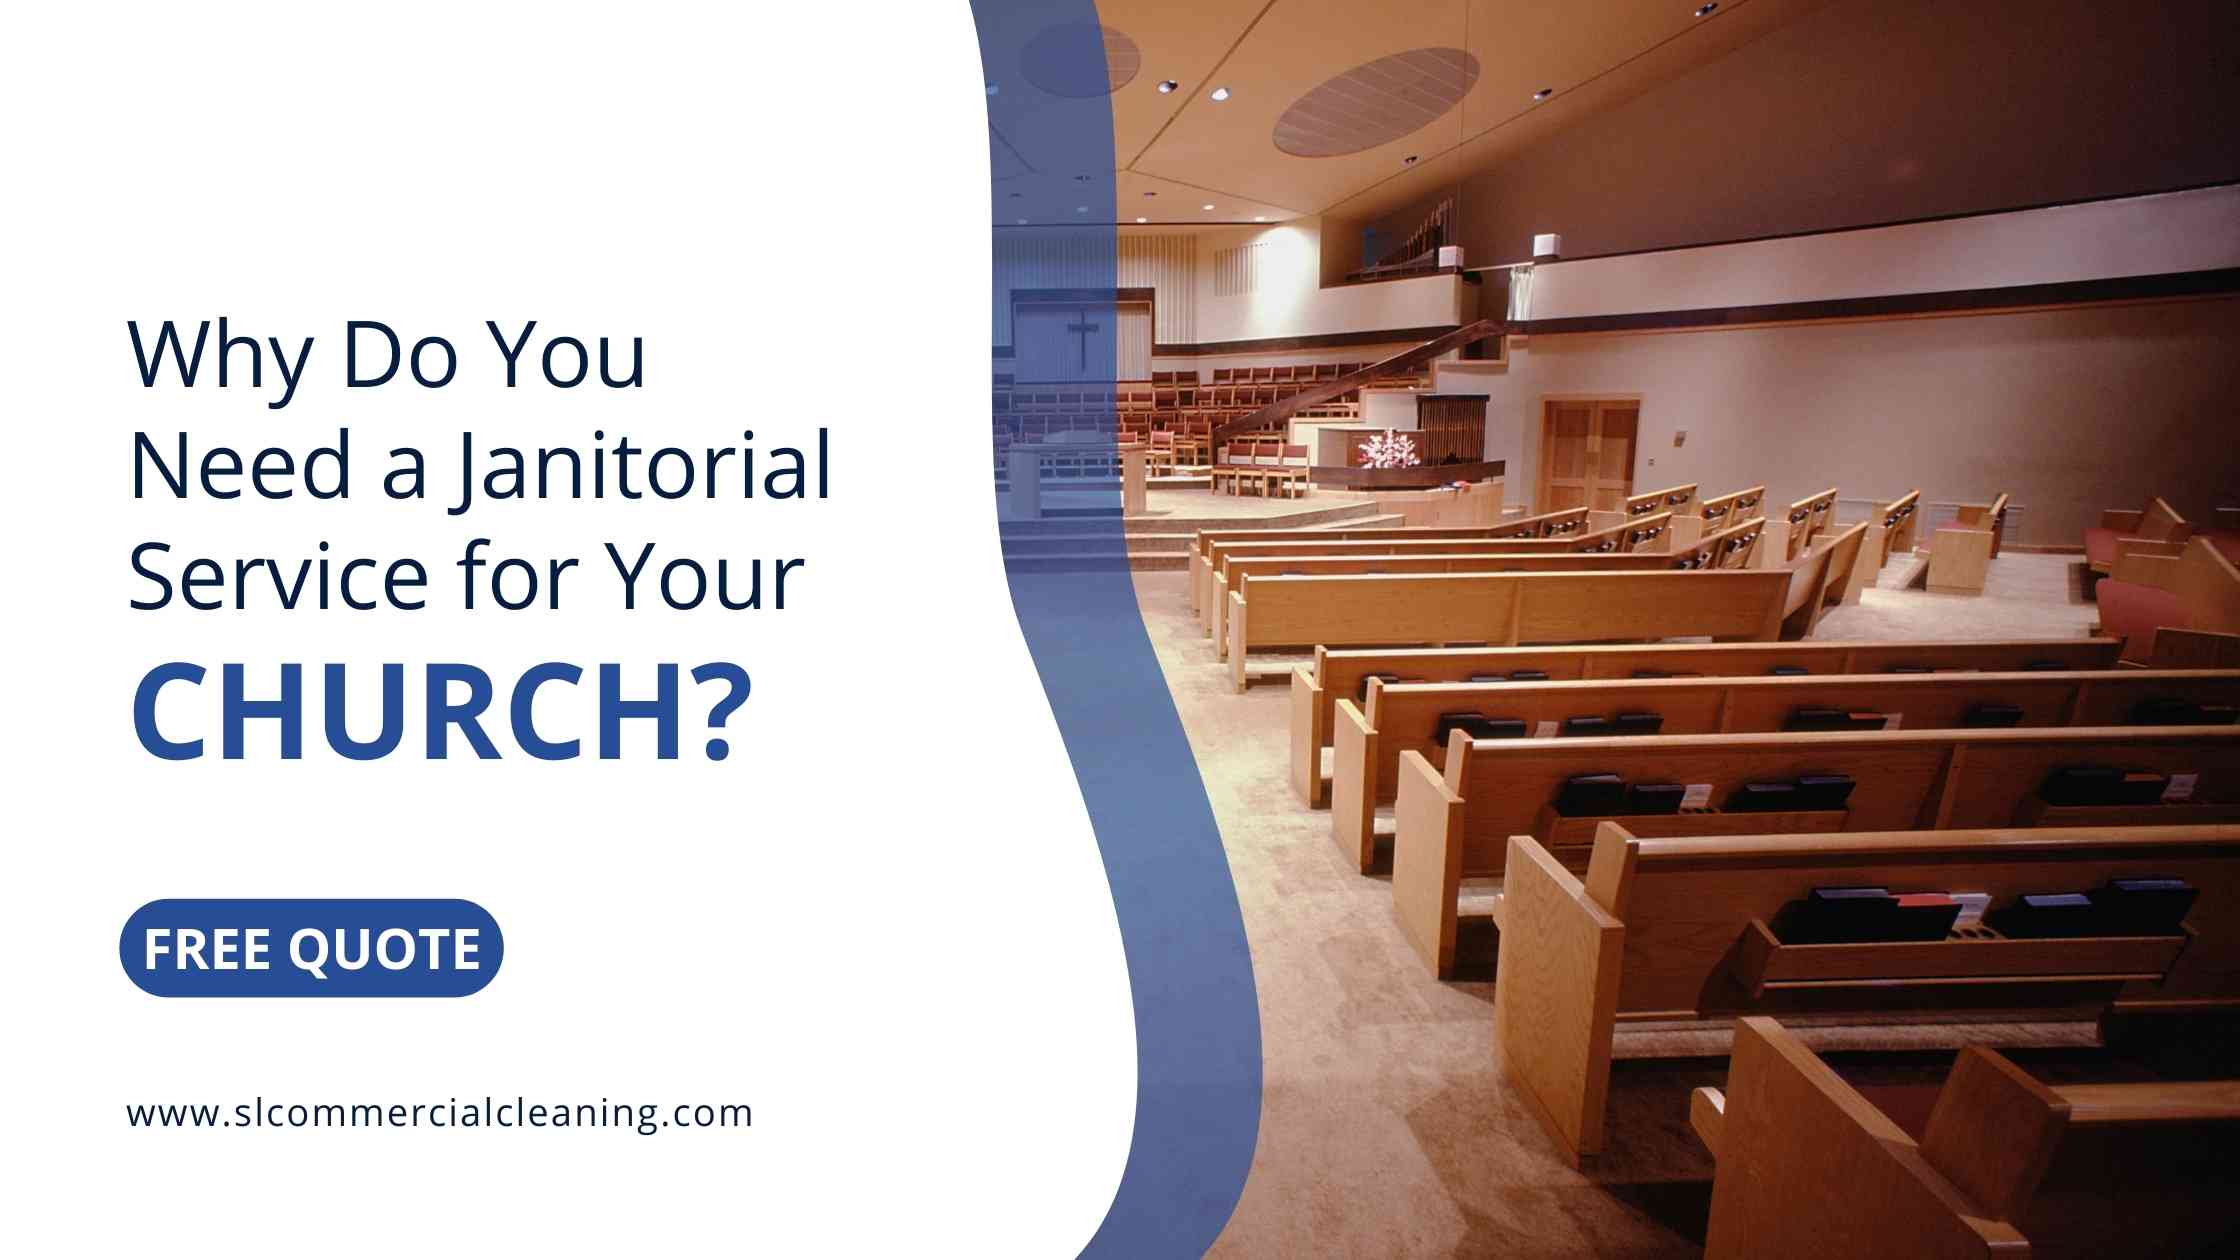 Janitorial Service for Church